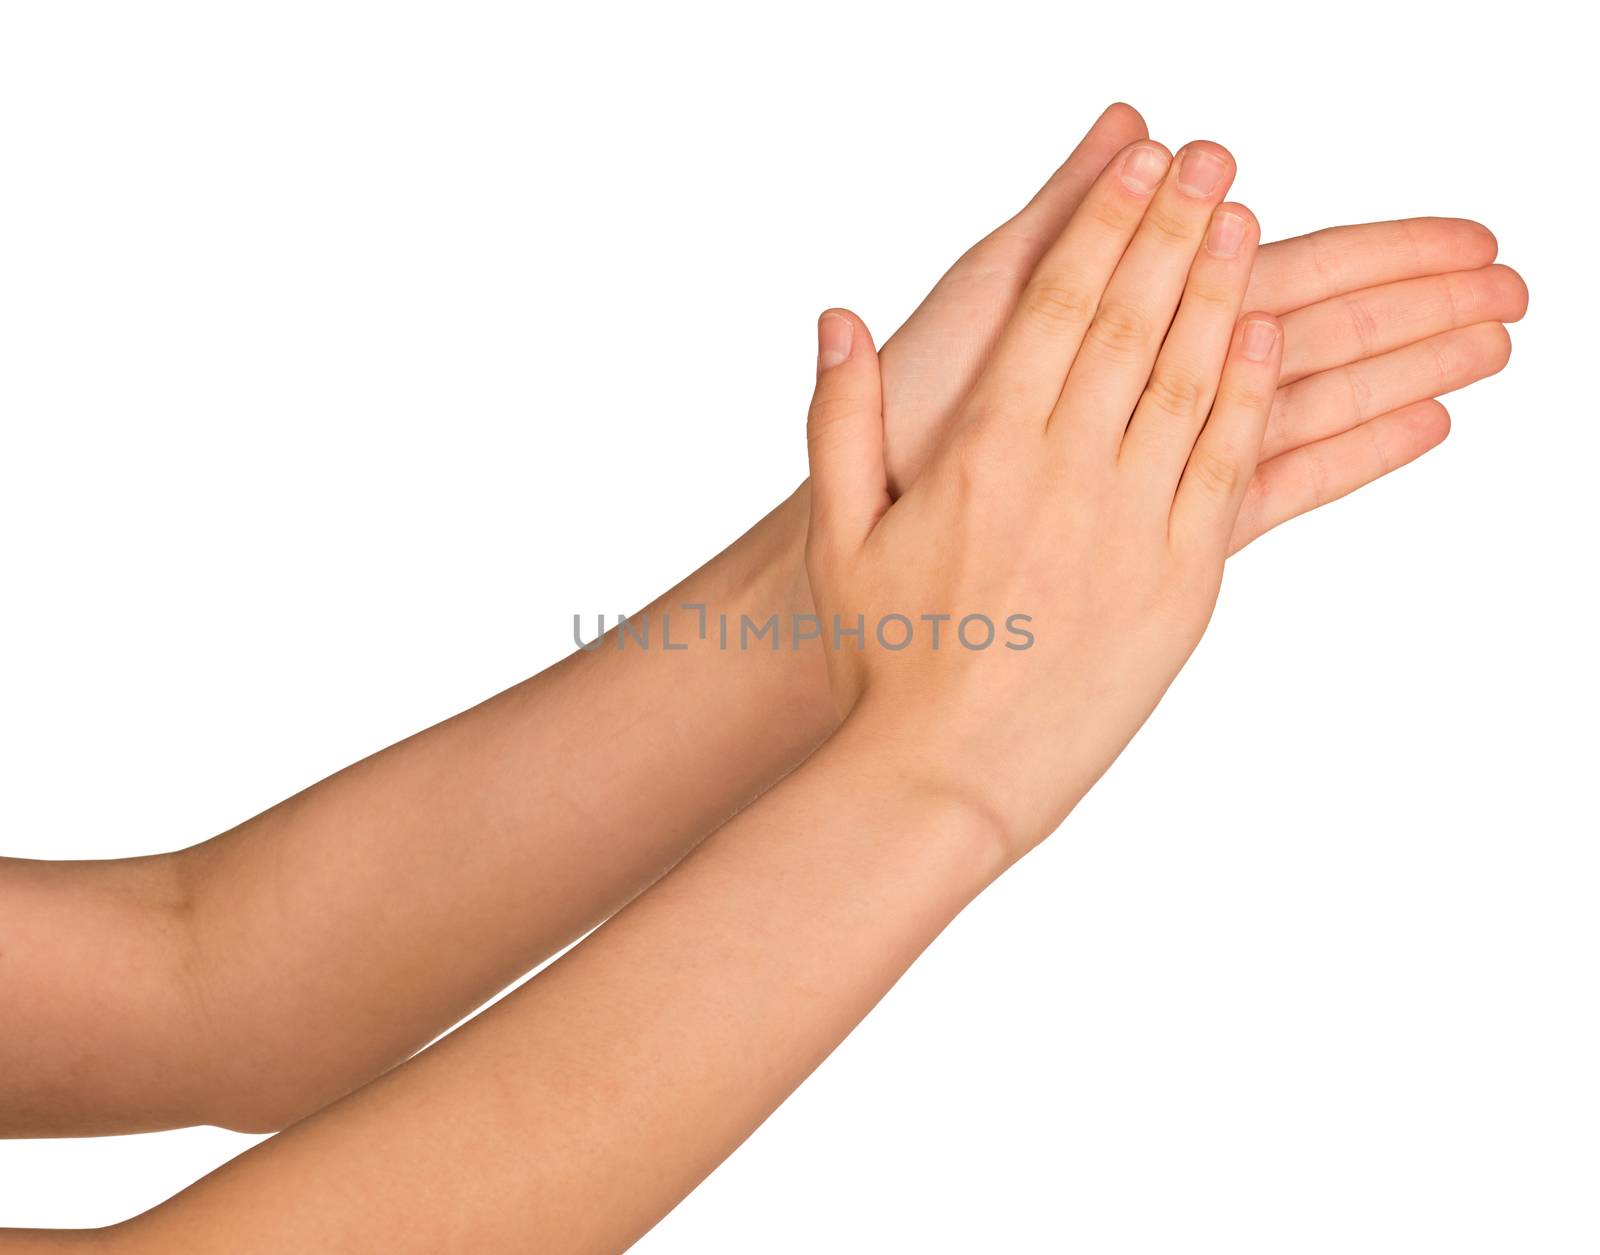 Hands applauding isolated on a white background